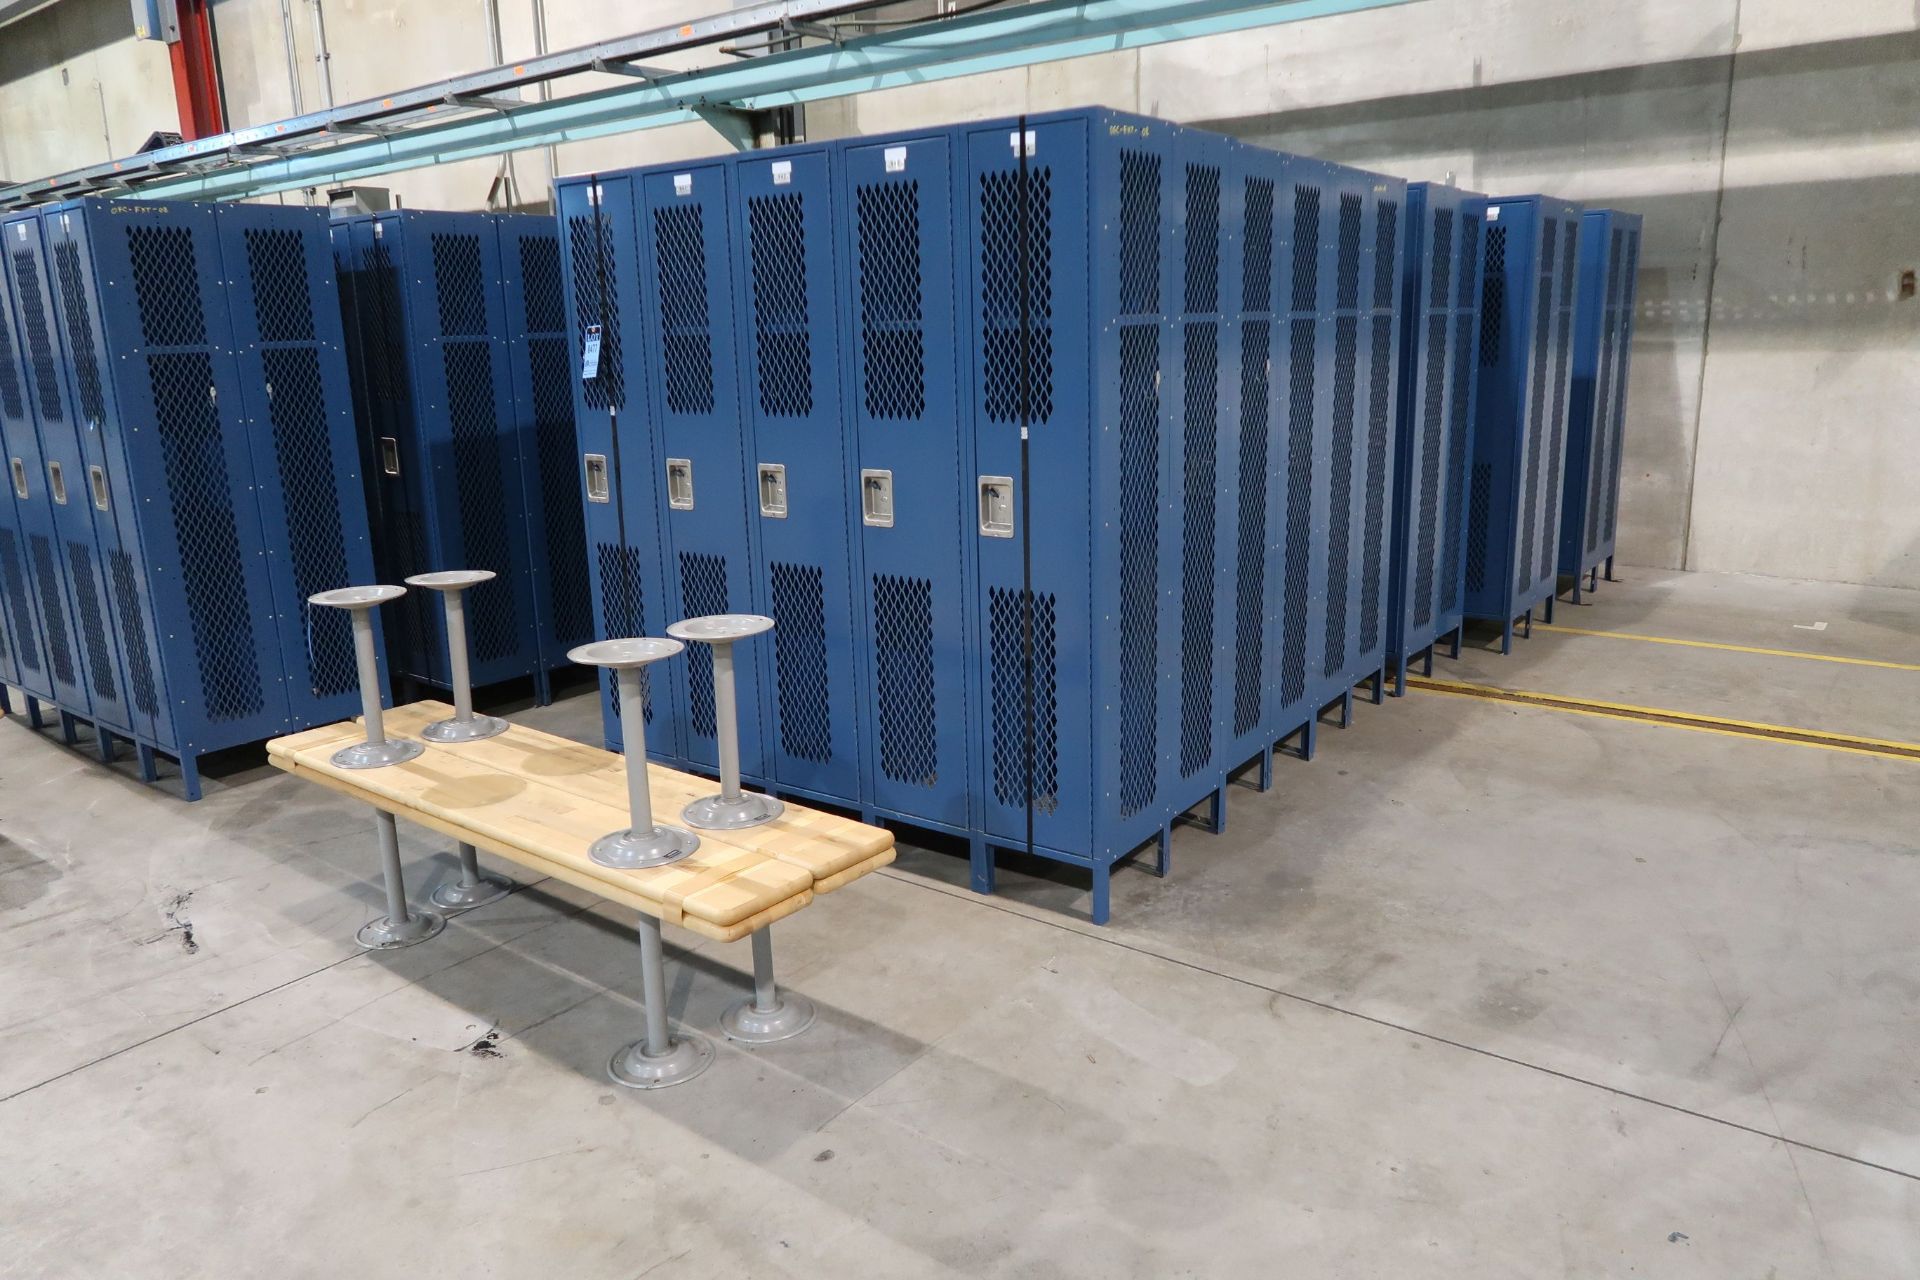 LOCKERS 15" X 15" X 78" HIGH STORAGE SOLUTIONS EMPLOYEE LOCKERS WITH (4) 6" WOOD SEAT BENCHES, 5-6